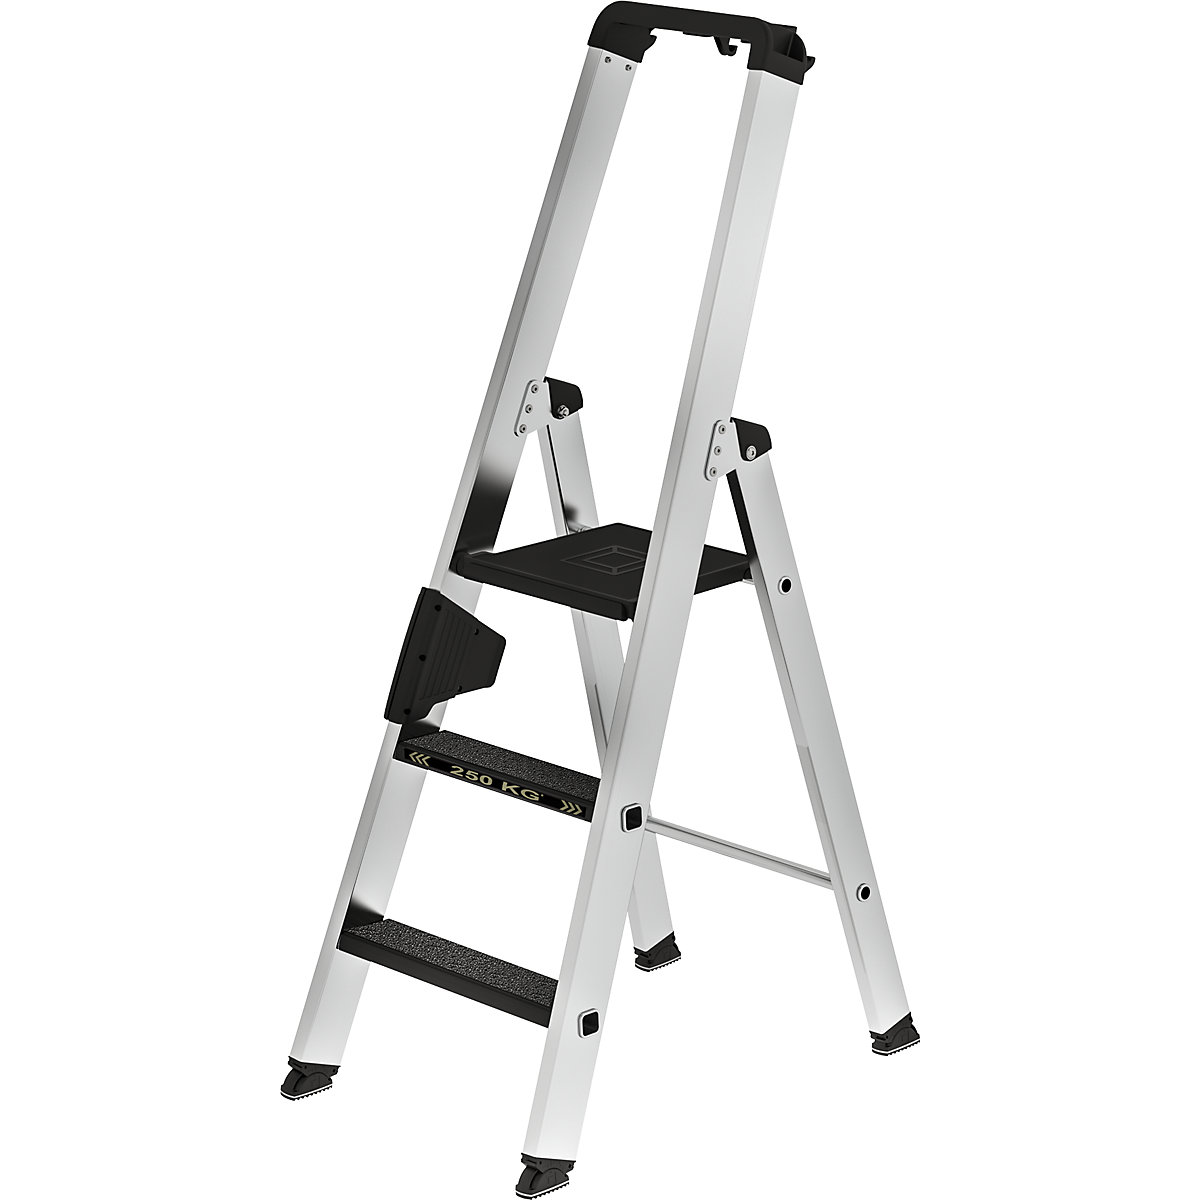 CLIP-STEP step ladder – MUNK, single sided access, slip resistant R13, durable, 3 steps-11